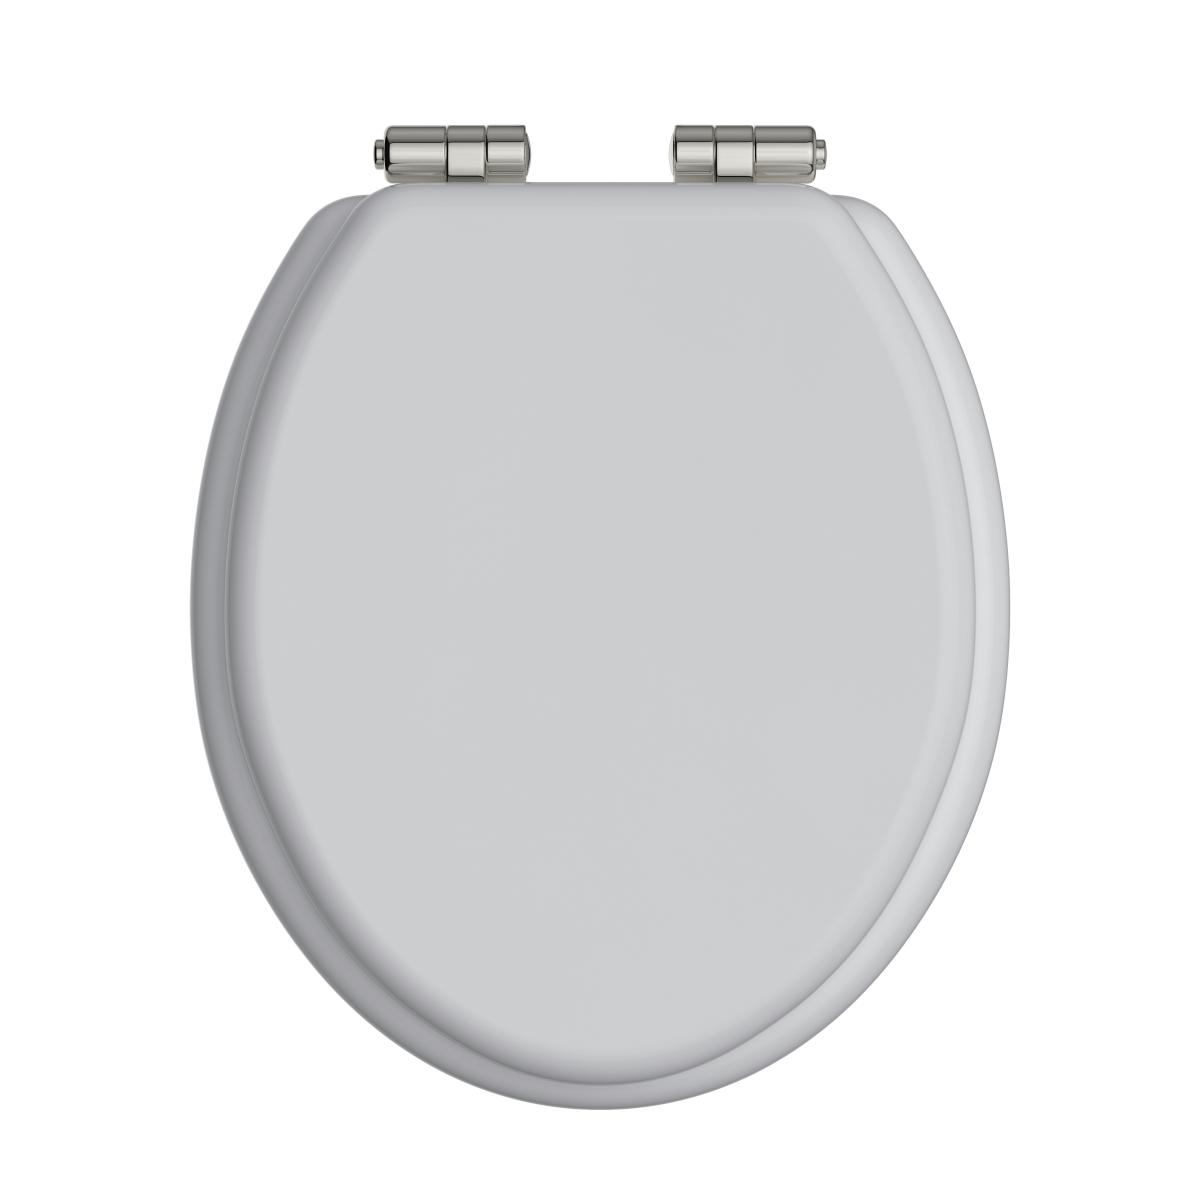 Toilet Seat Soft Close Vintage Gold Hinges - White Gloss